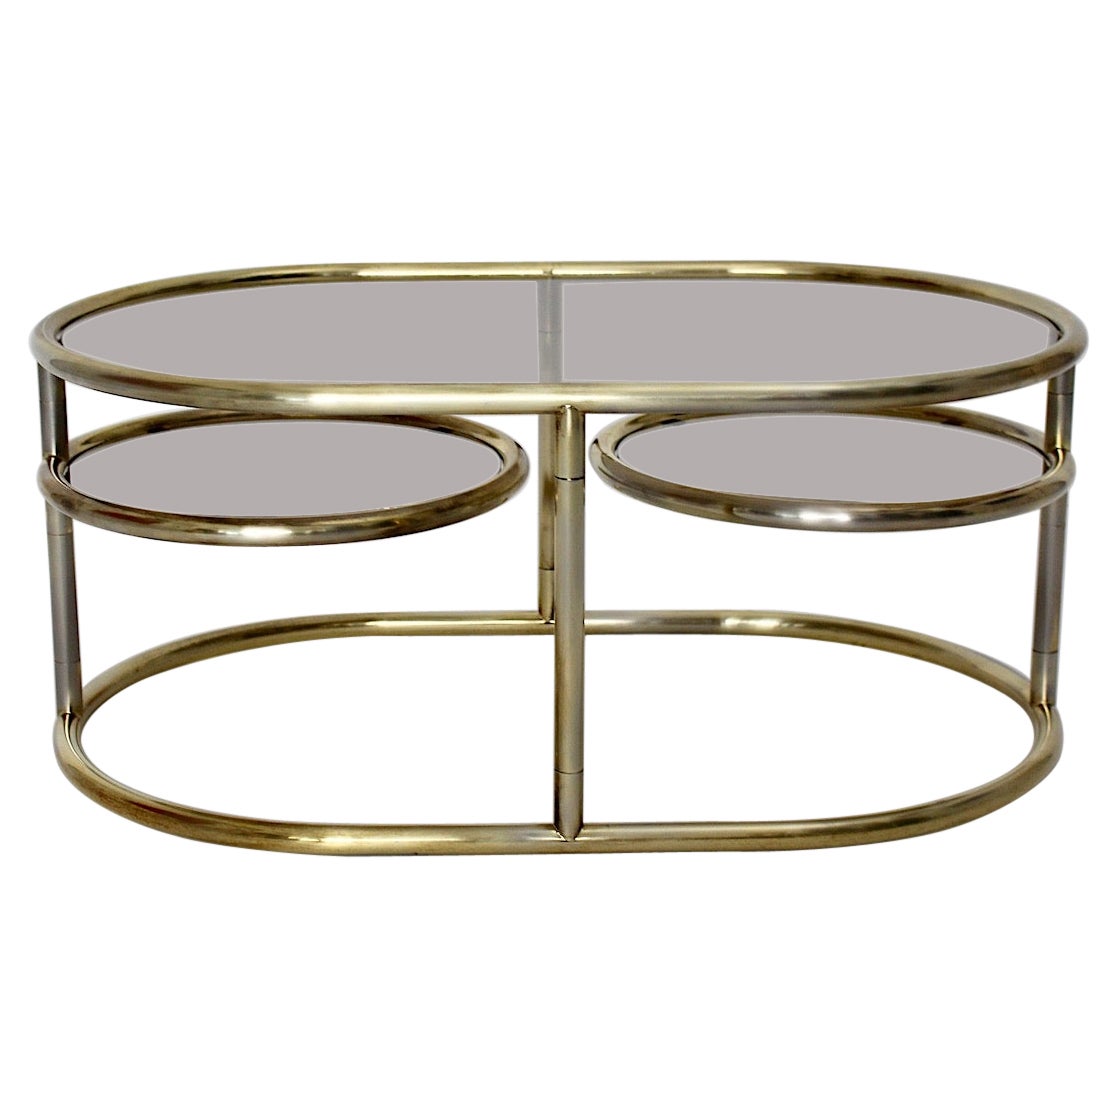 Modernist Vintage Golden Metal Glass Oval Coffee Table Sofa Table, 1960s, Italy For Sale